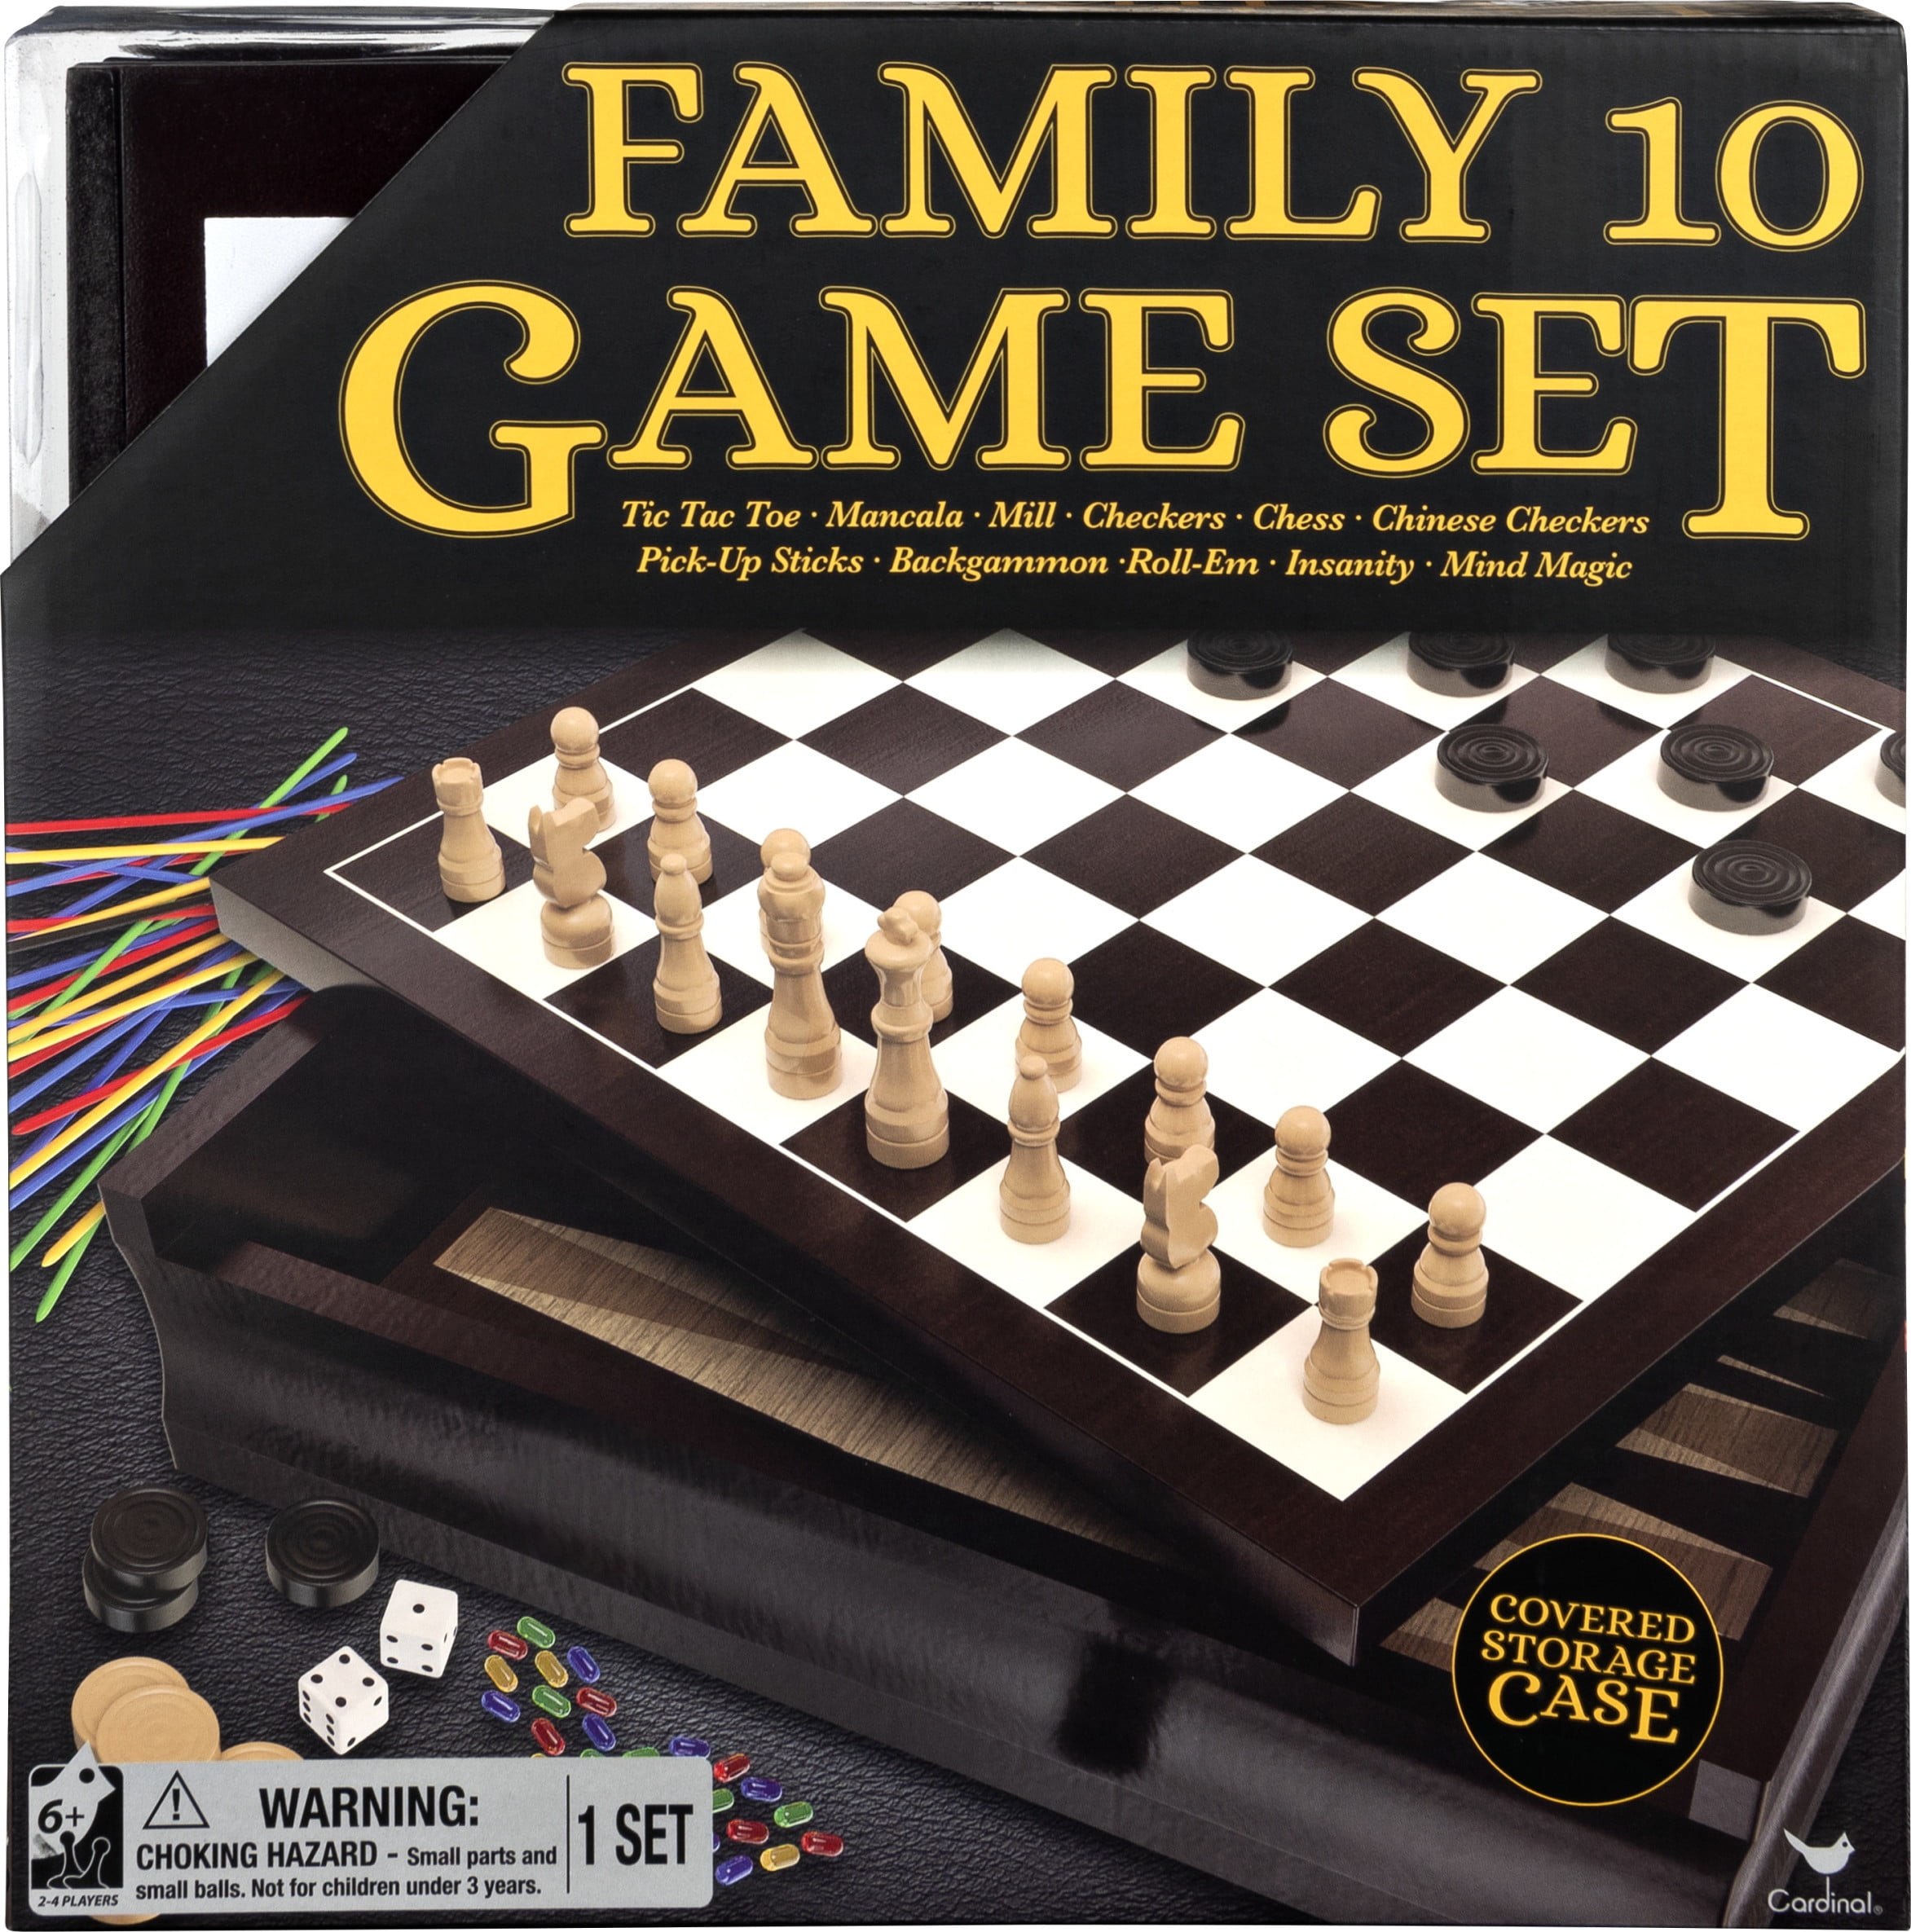 A5065 for sale online Hasbro Sorry Family Board Game 